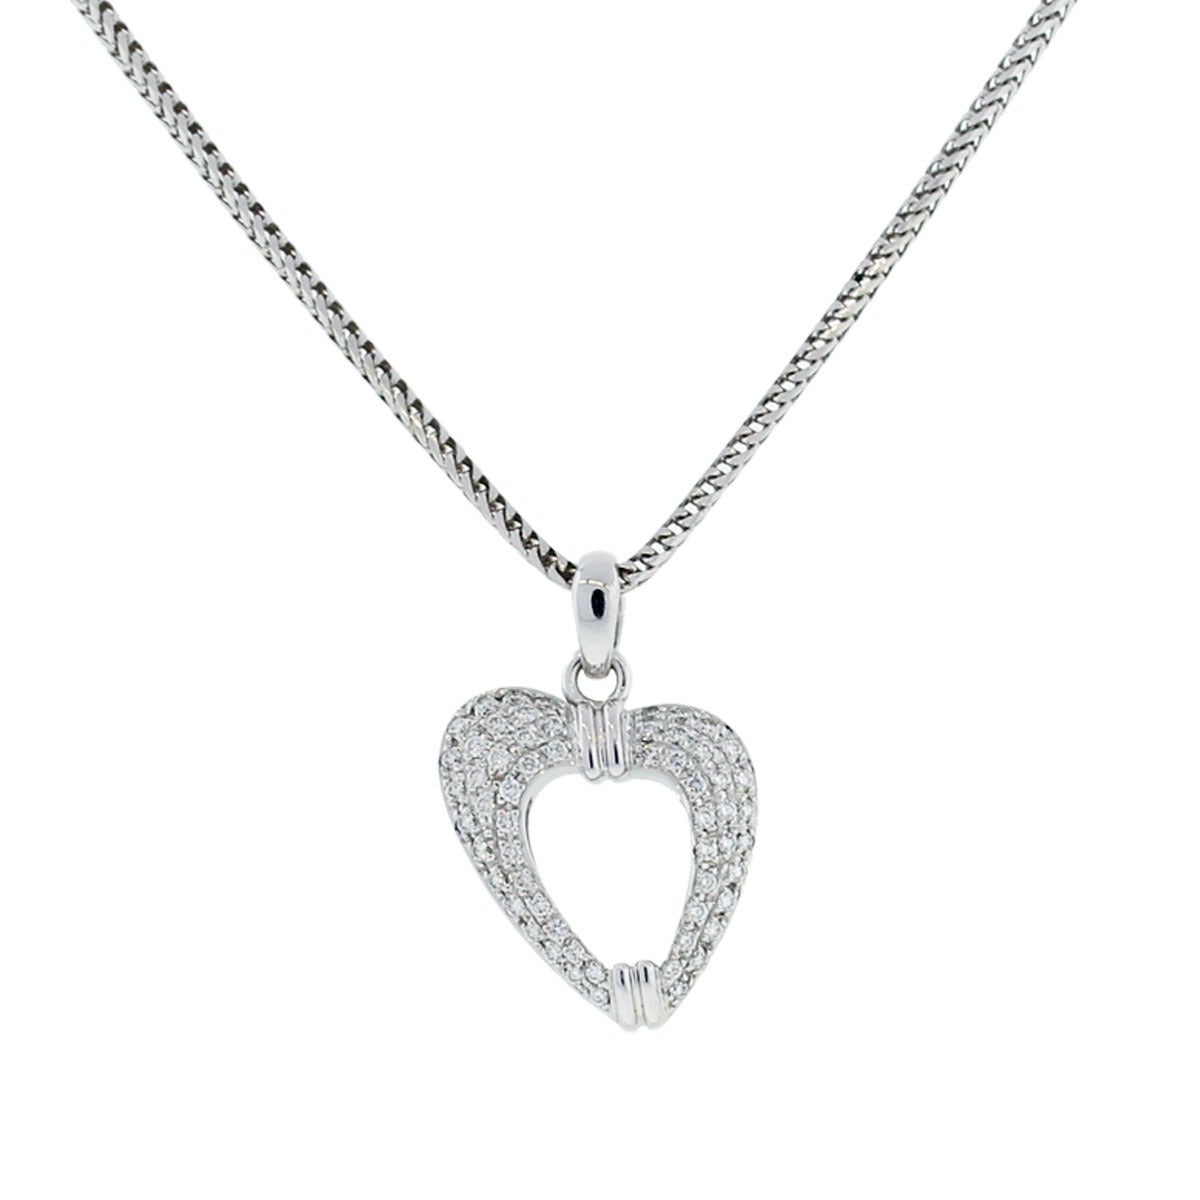 Style: Di Modolo 18k White Gold Heart Pendant Necklace
Material: 18k White Gold
Total Weight: 11.8g  (7.6dwt)
Necklace Length : Chain is 18'' in length
Pendant Size: 0.83